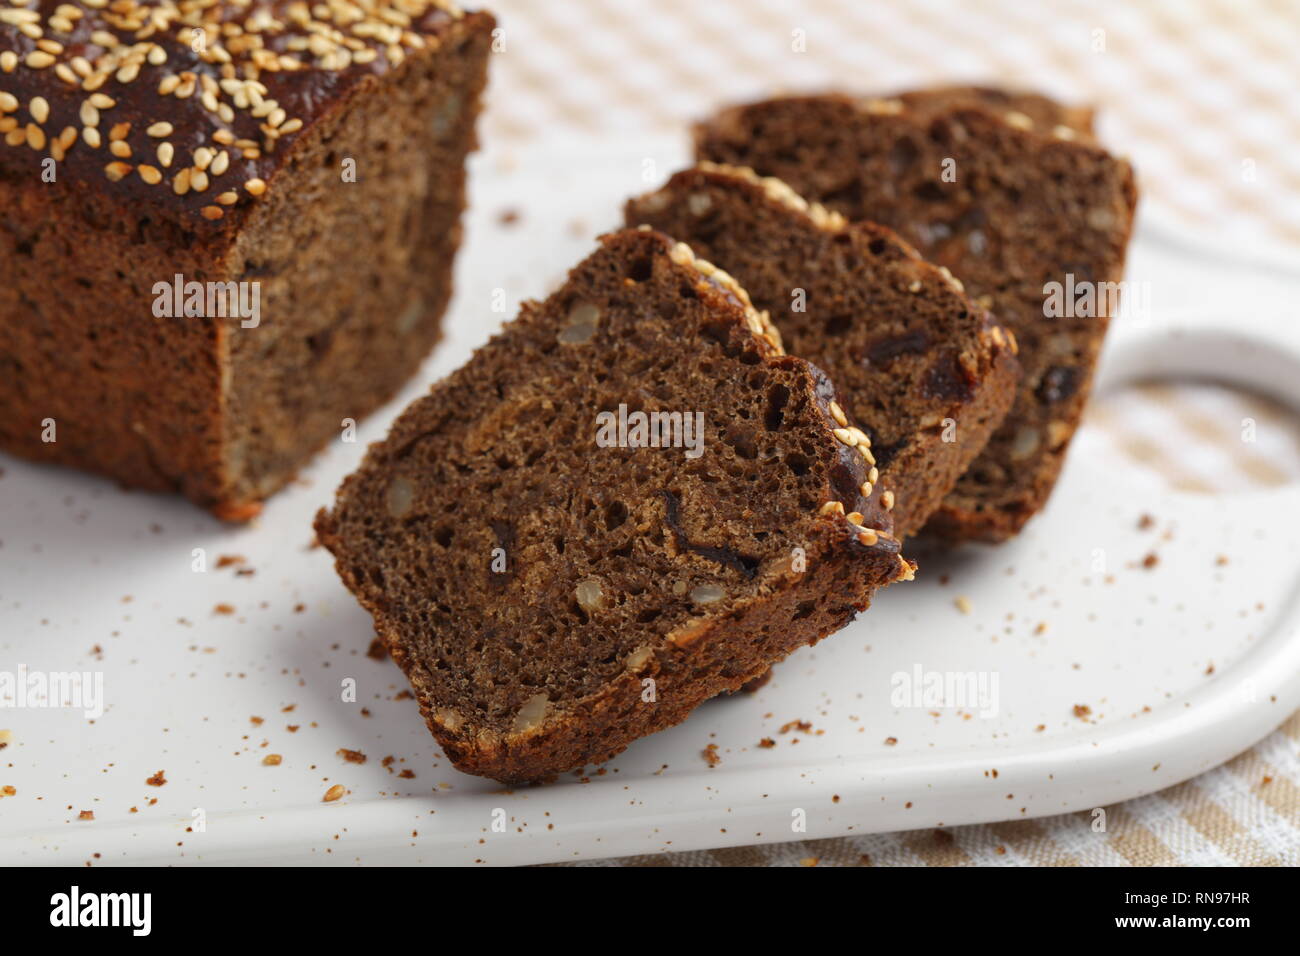 Rye bread with grains and raisins on a cutting board Stock Photo